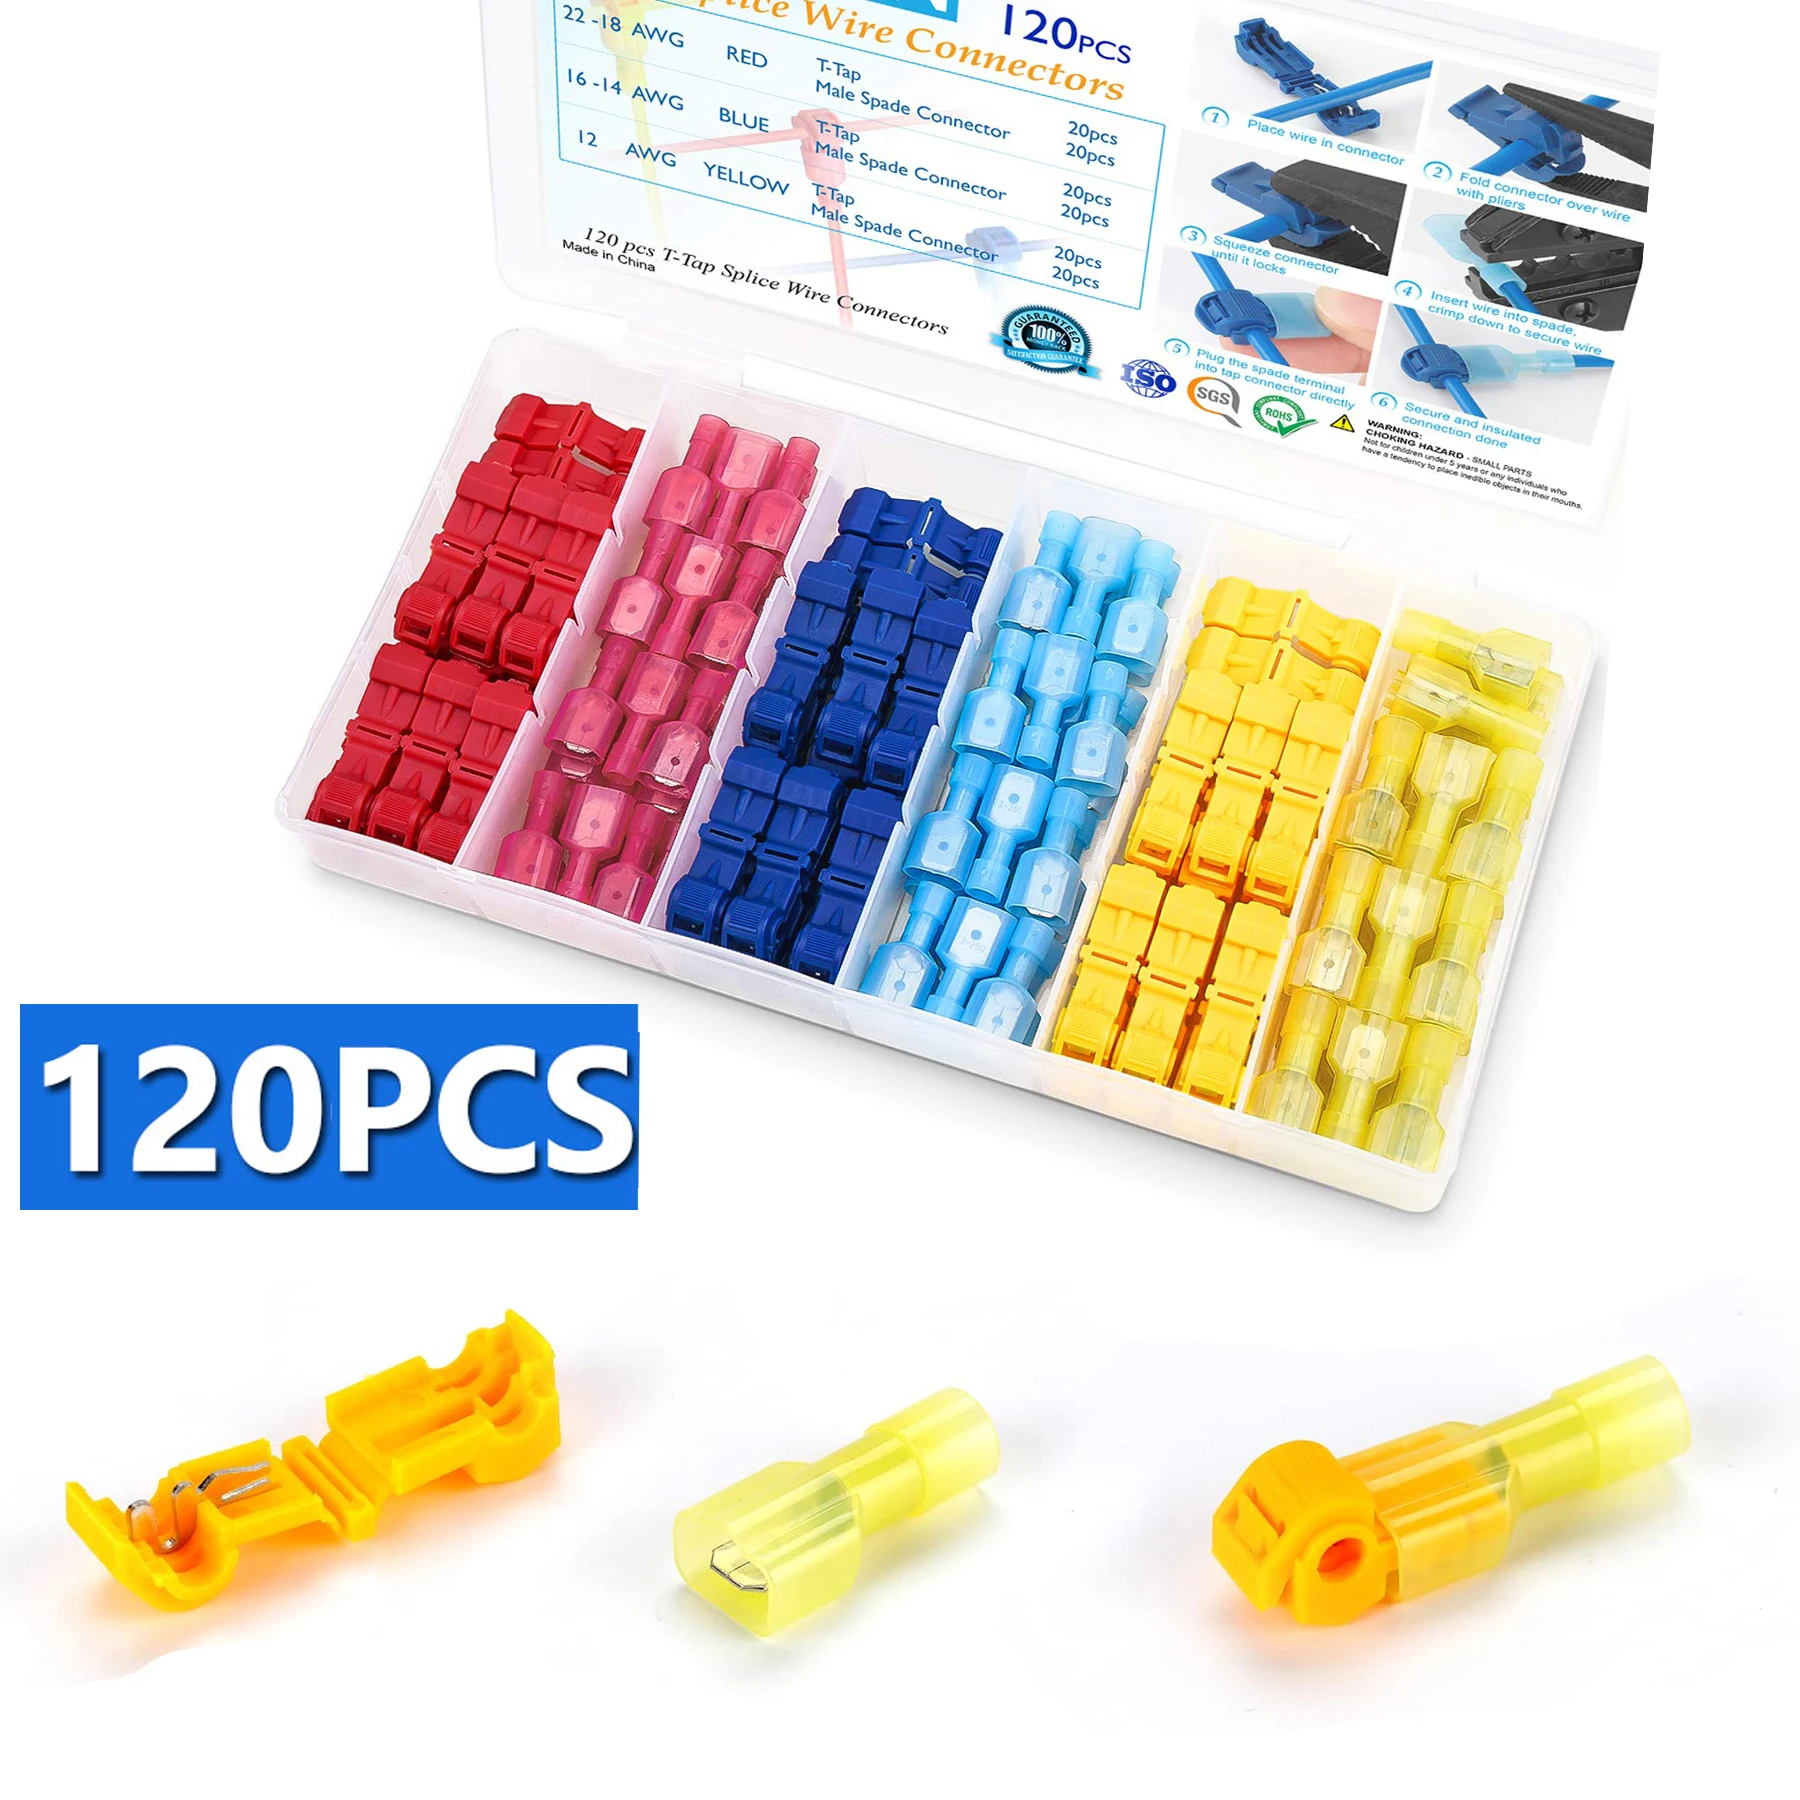 120 PCS Crimp Terminal Blocks Electrical Connector Connection Clamps T-Shaped Quick-Free Stripping Plugs Cable Connector Plug oem motherboard connection flex cable for huawei p smart 2017